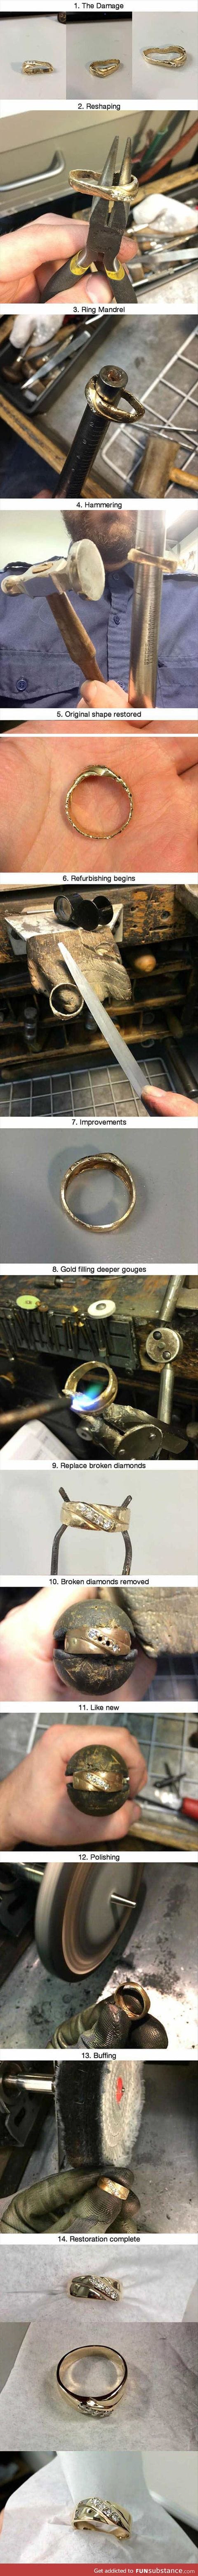 How to fix a wedding ring